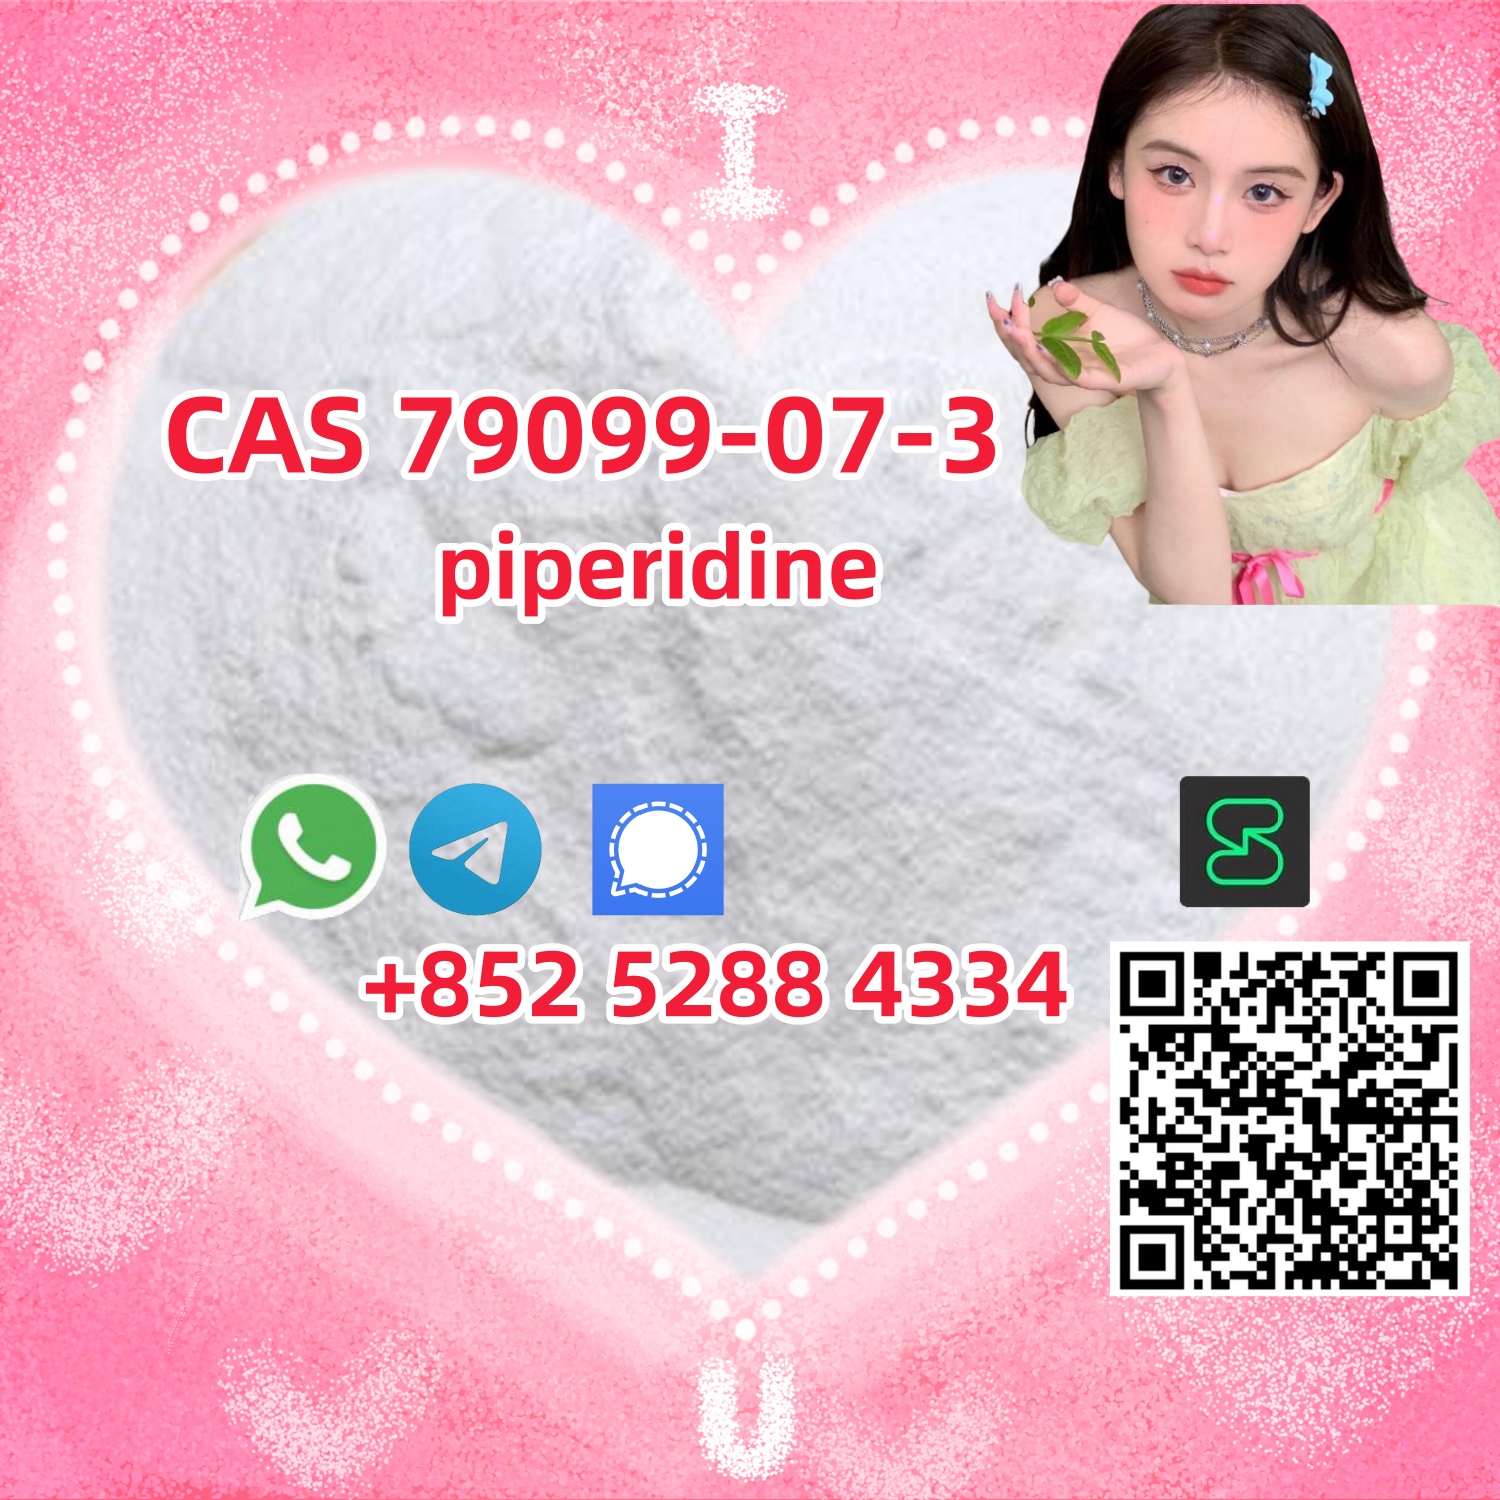 Sold in powder piperidine CAS:79099-07-3,iskele,Real Estate,Free Classifieds,Post Free Ads,77traders.com